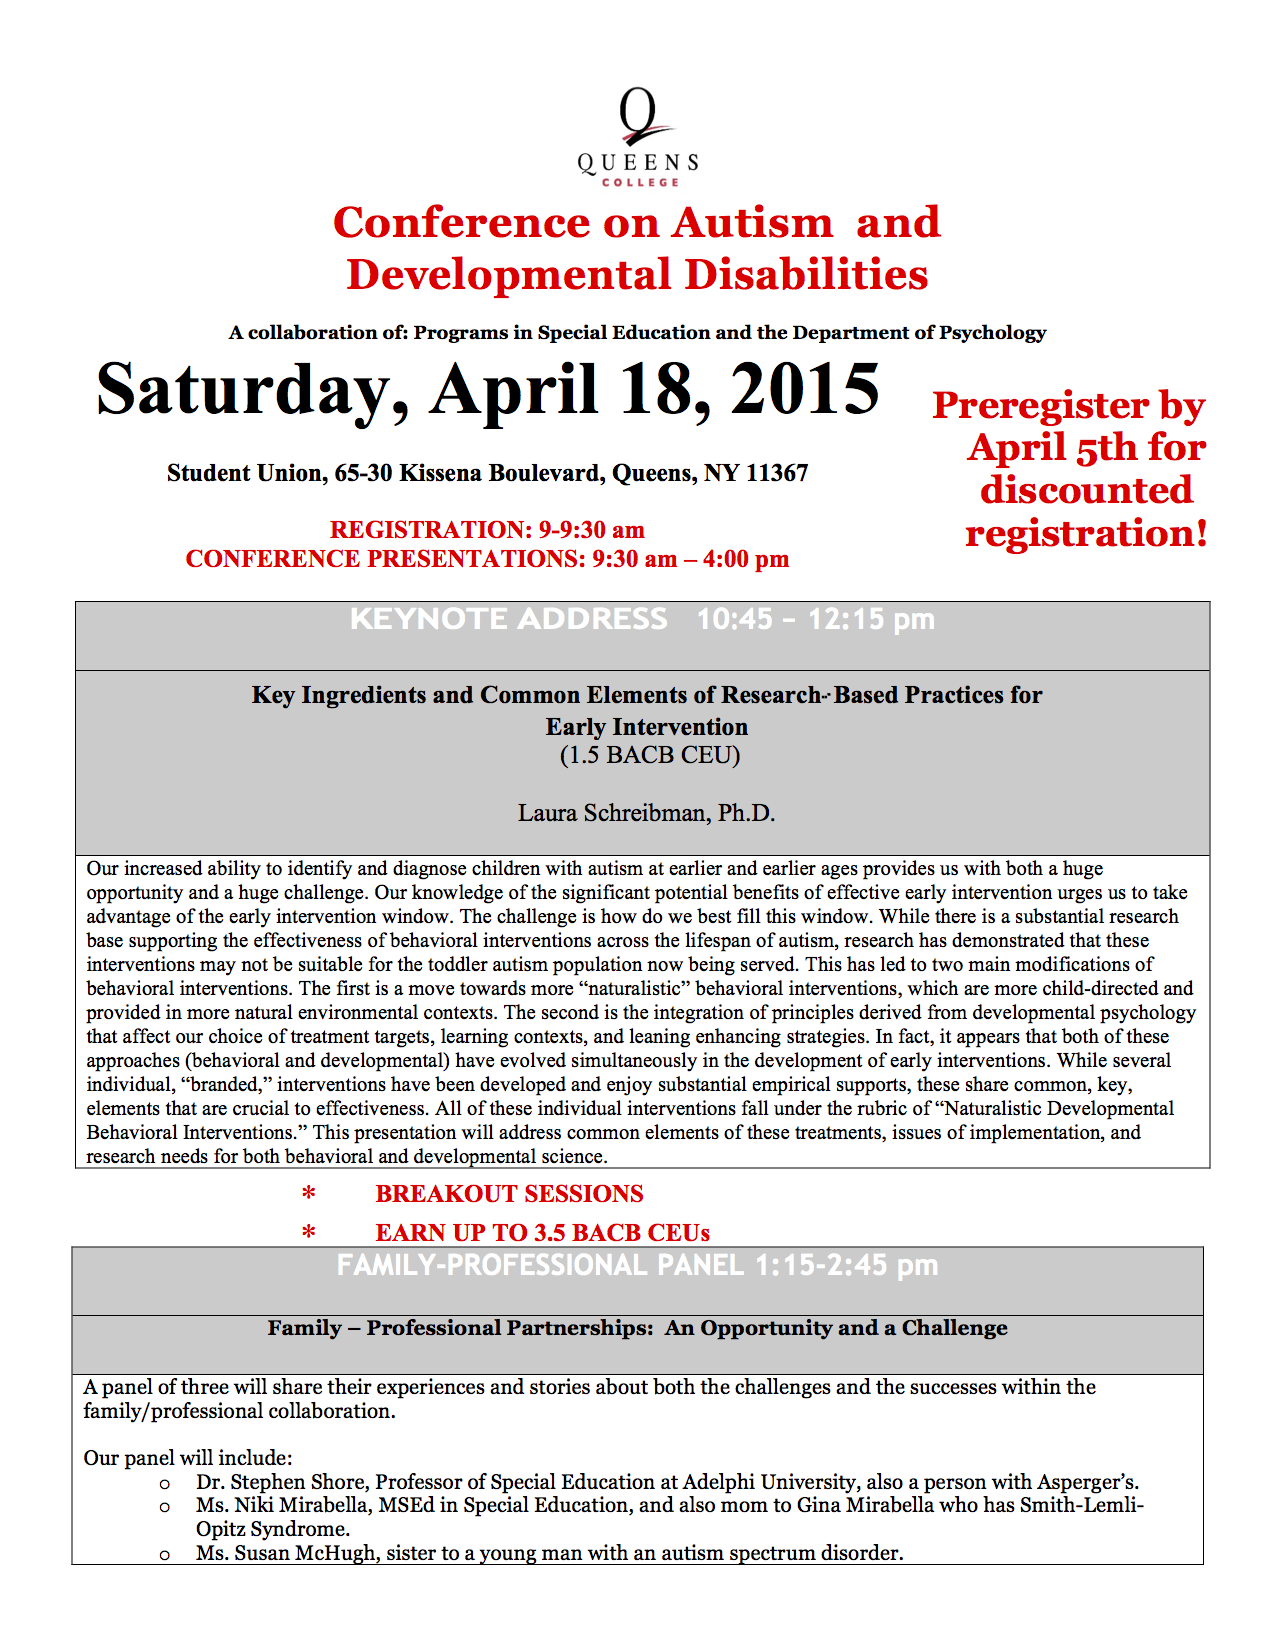 Queens College Annual Conference on Autism and Developmental Disabilities